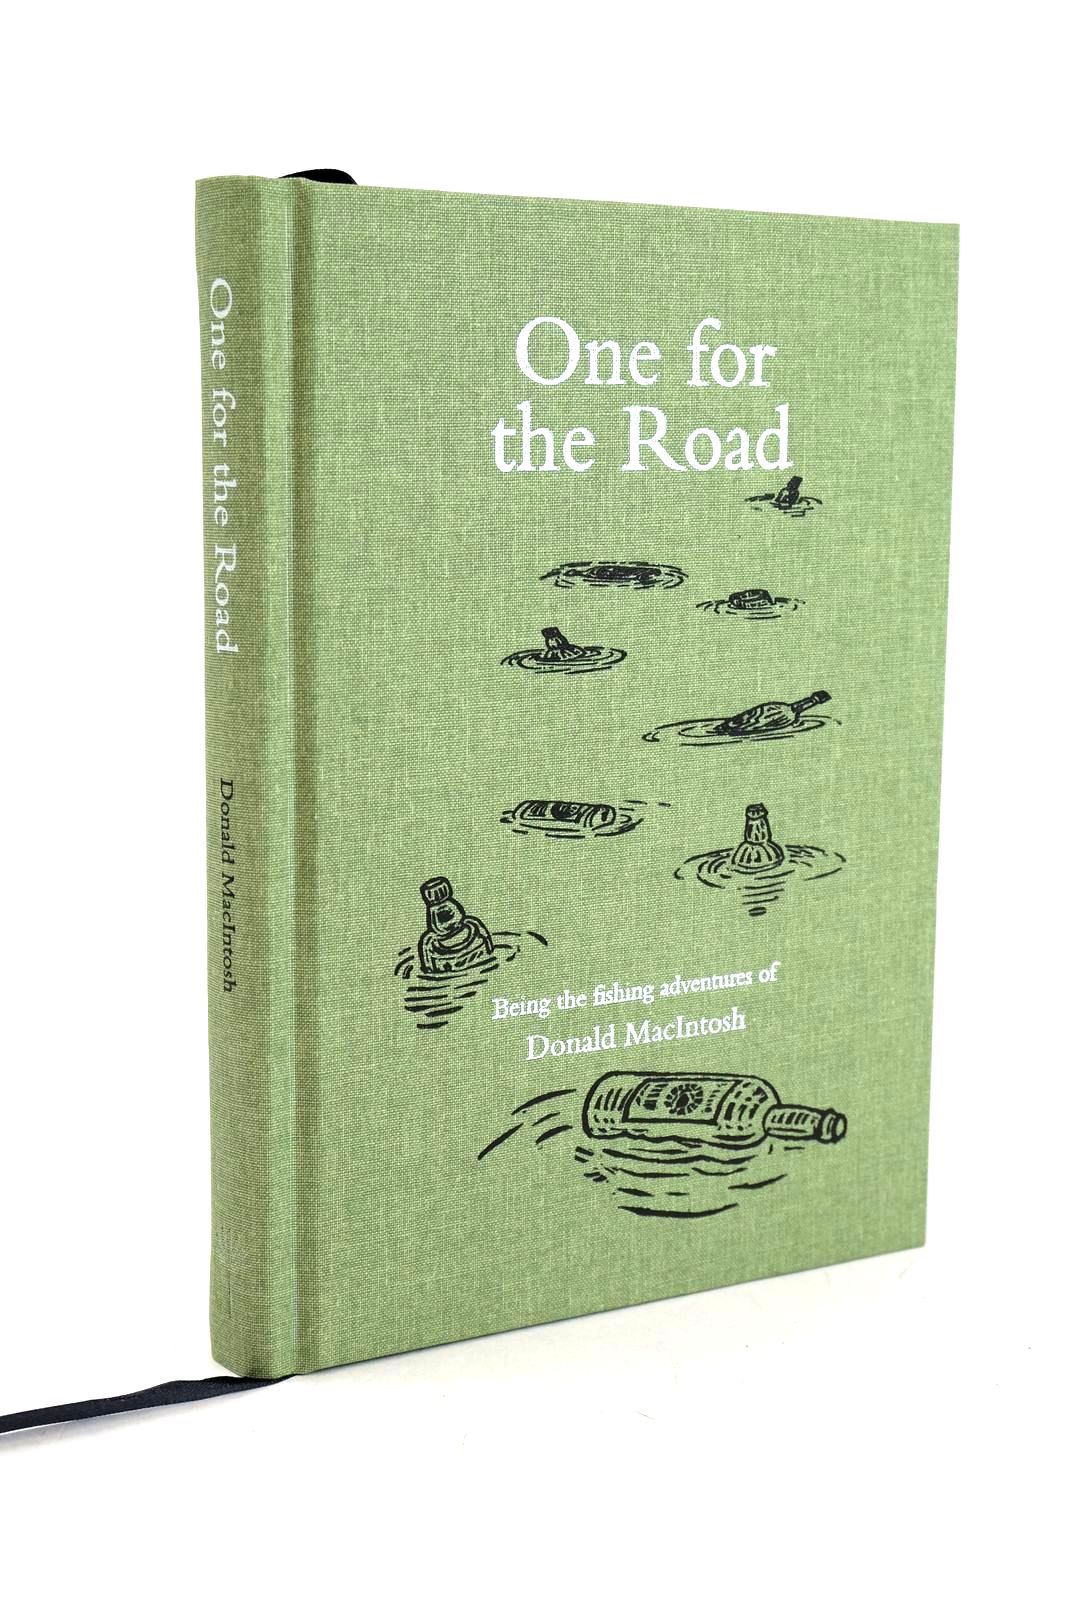 Photo of ONE FOR THE ROAD written by Macintosh, Donald illustrated by Richardson, John published by The Medlar Press (STOCK CODE: 1326730)  for sale by Stella & Rose's Books